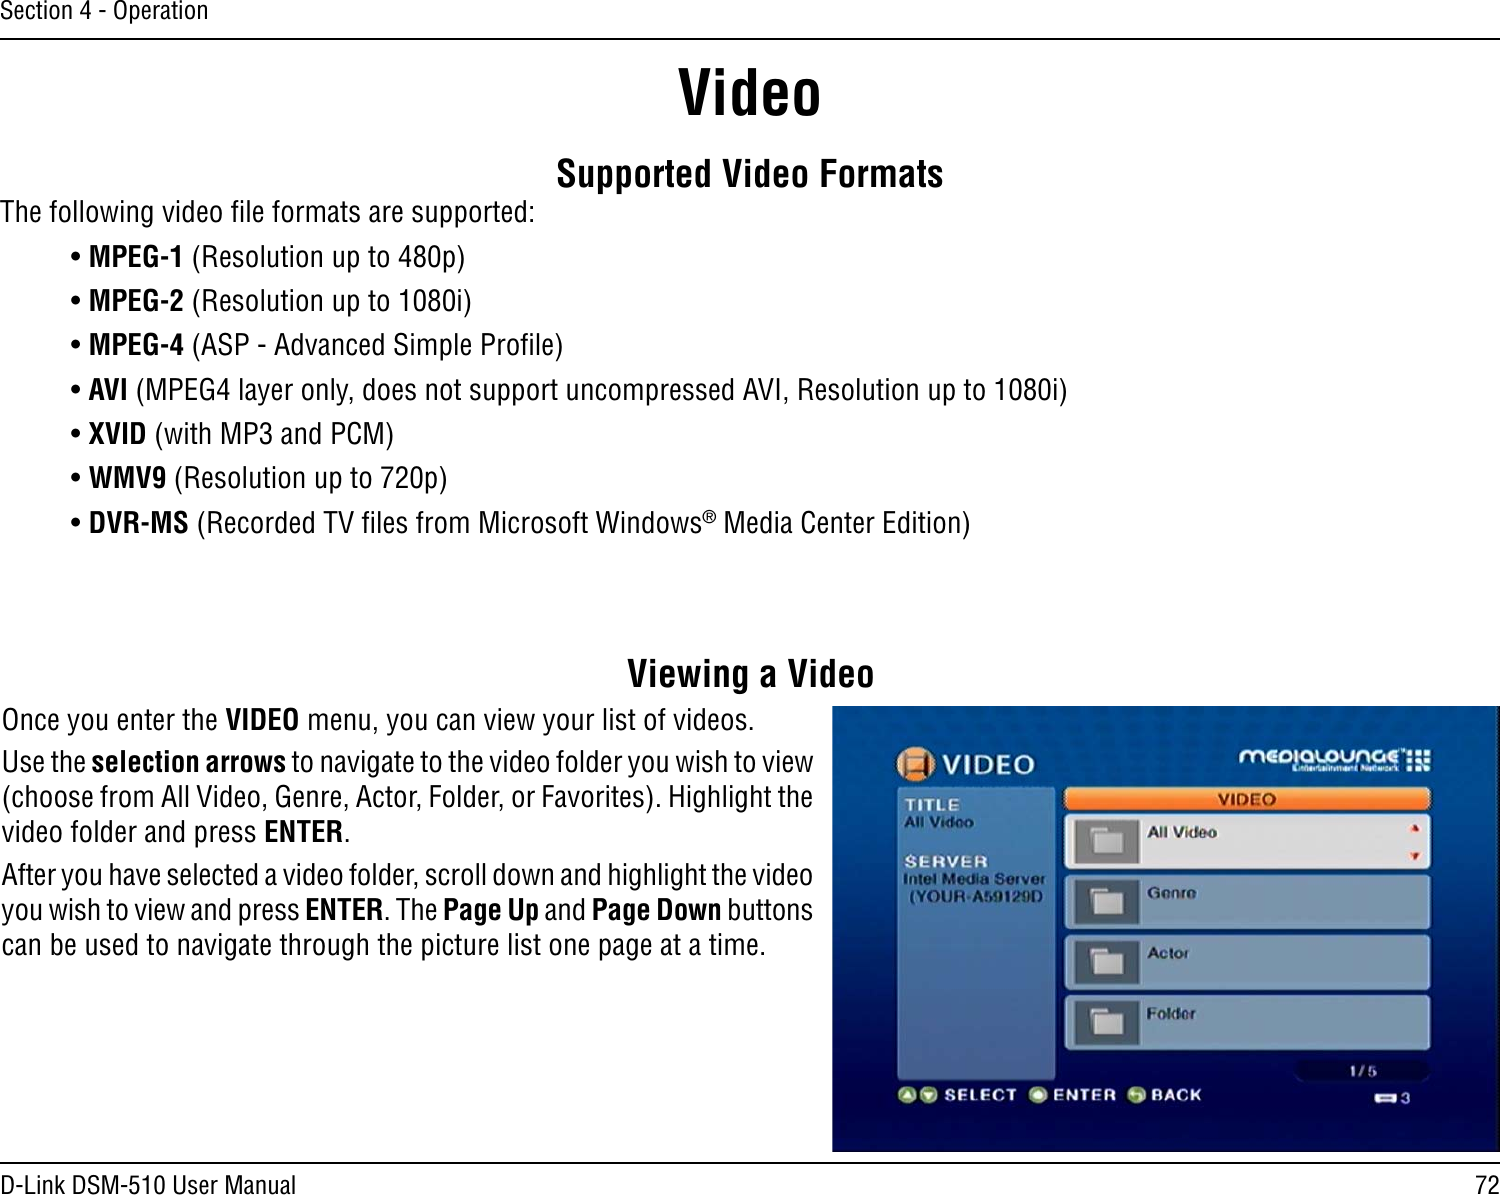 72D-Link DSM-510 User ManualSection 4 - OperationSupported Video FormatsThe following video ﬁle formats are supported:• MPEG-1 (Resolution up to 480p)• MPEG-2 (Resolution up to 1080i)• MPEG-4 (ASP - Advanced Simple Proﬁle) • AVI (MPEG4 layer only, does not support uncompressed AVI, Resolution up to 1080i)• XVID (with MP3 and PCM)• WMV9 (Resolution up to 720p)• DVR-MS (Recorded TV ﬁles from Microsoft Windows® Media Center Edition)Viewing a VideoOnce you enter the VIDEO menu, you can view your list of videos. Use the selection arrows to navigate to the video folder you wish to view (choose from All Video, Genre, Actor, Folder, or Favorites). Highlight the video folder and press ENTER.After you have selected a video folder, scroll down and highlight the video you wish to view and press ENTER. The Page Up and Page Down buttons can be used to navigate through the picture list one page at a time.Video